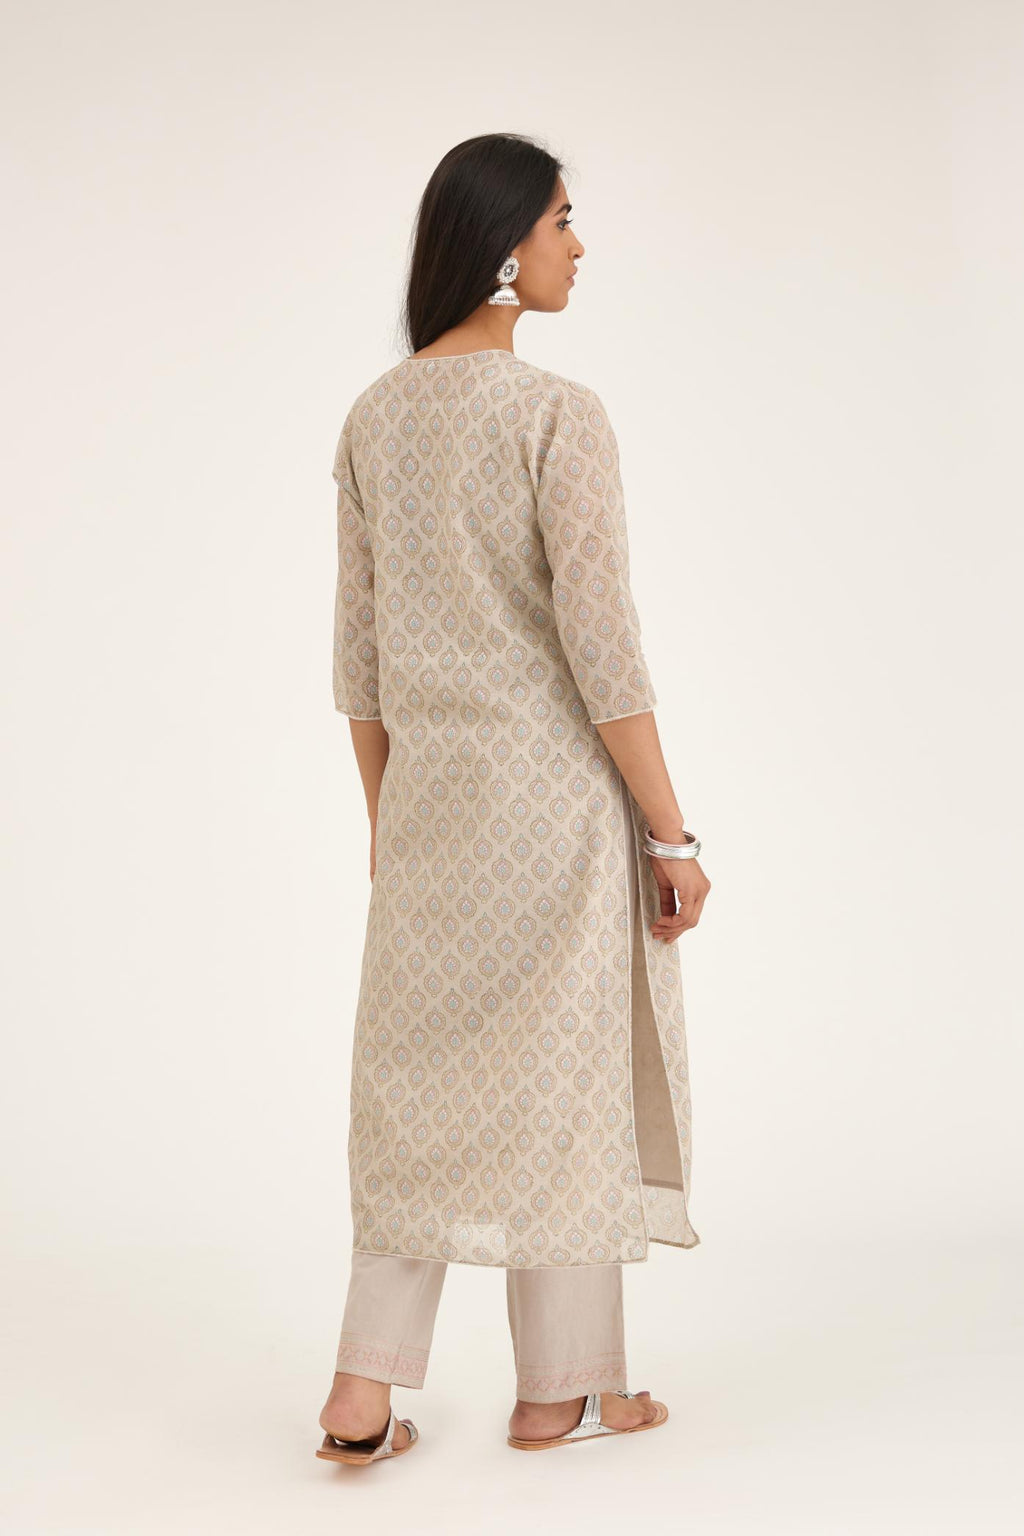 Grey silk chanderi straight kurta set with all-over hand block print and silver bugle beads detailing.